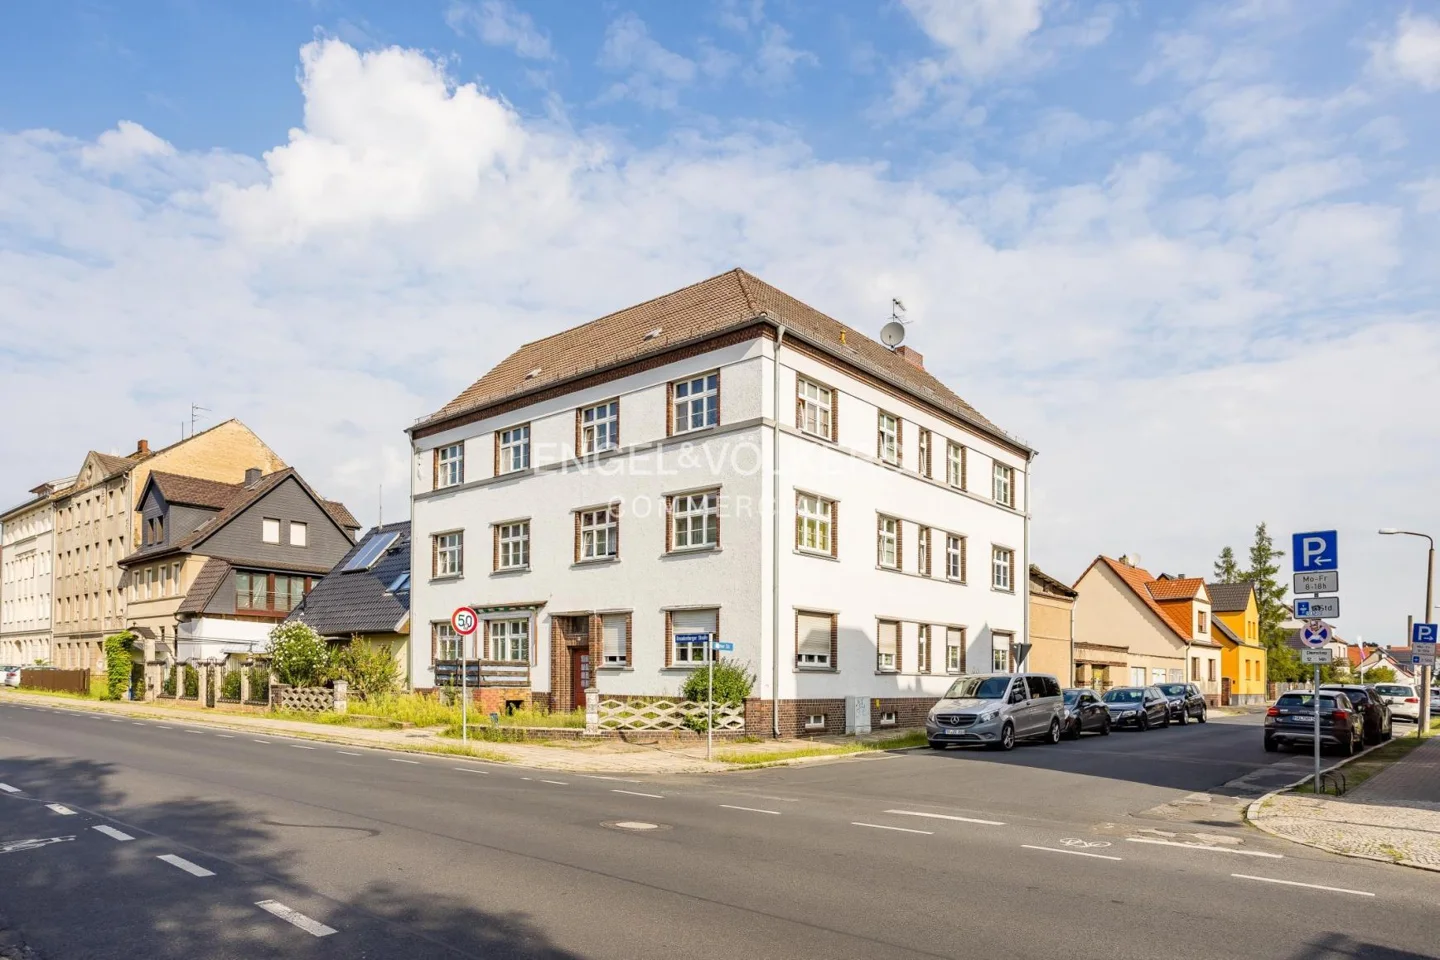 Fully rented apartment building in Luckenwalde